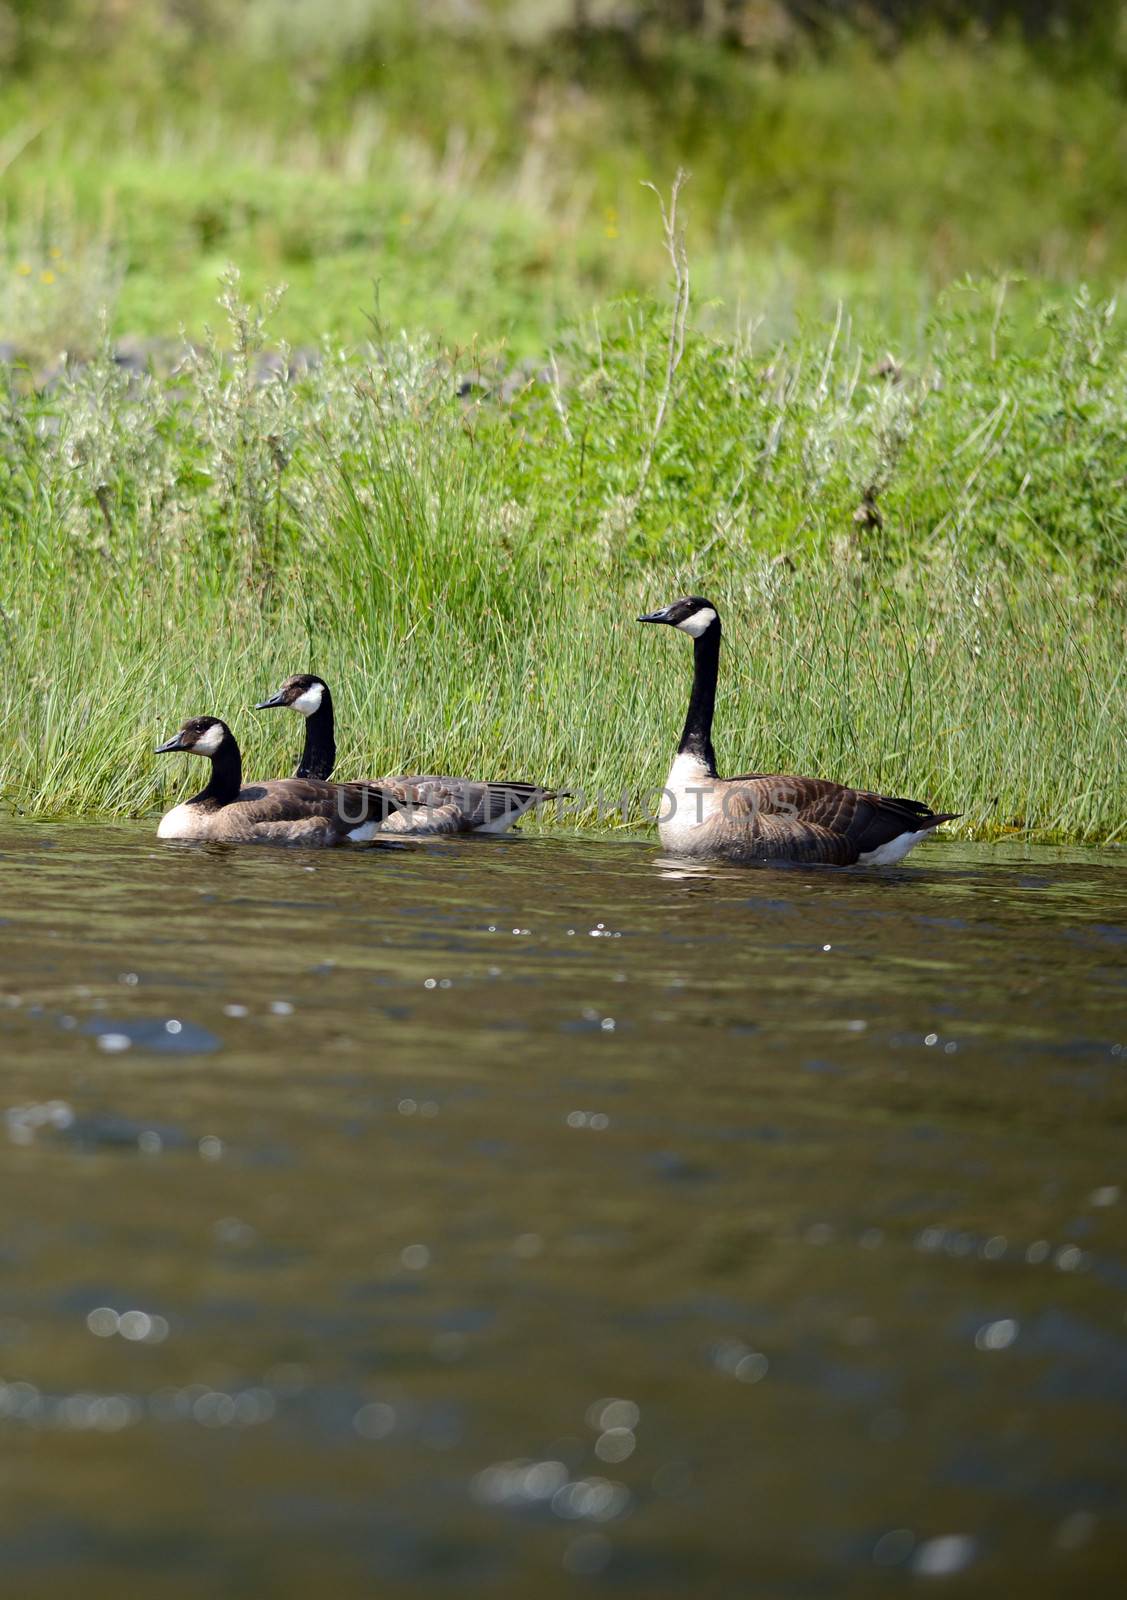 three canada geese on water in oregon by ftlaudgirl